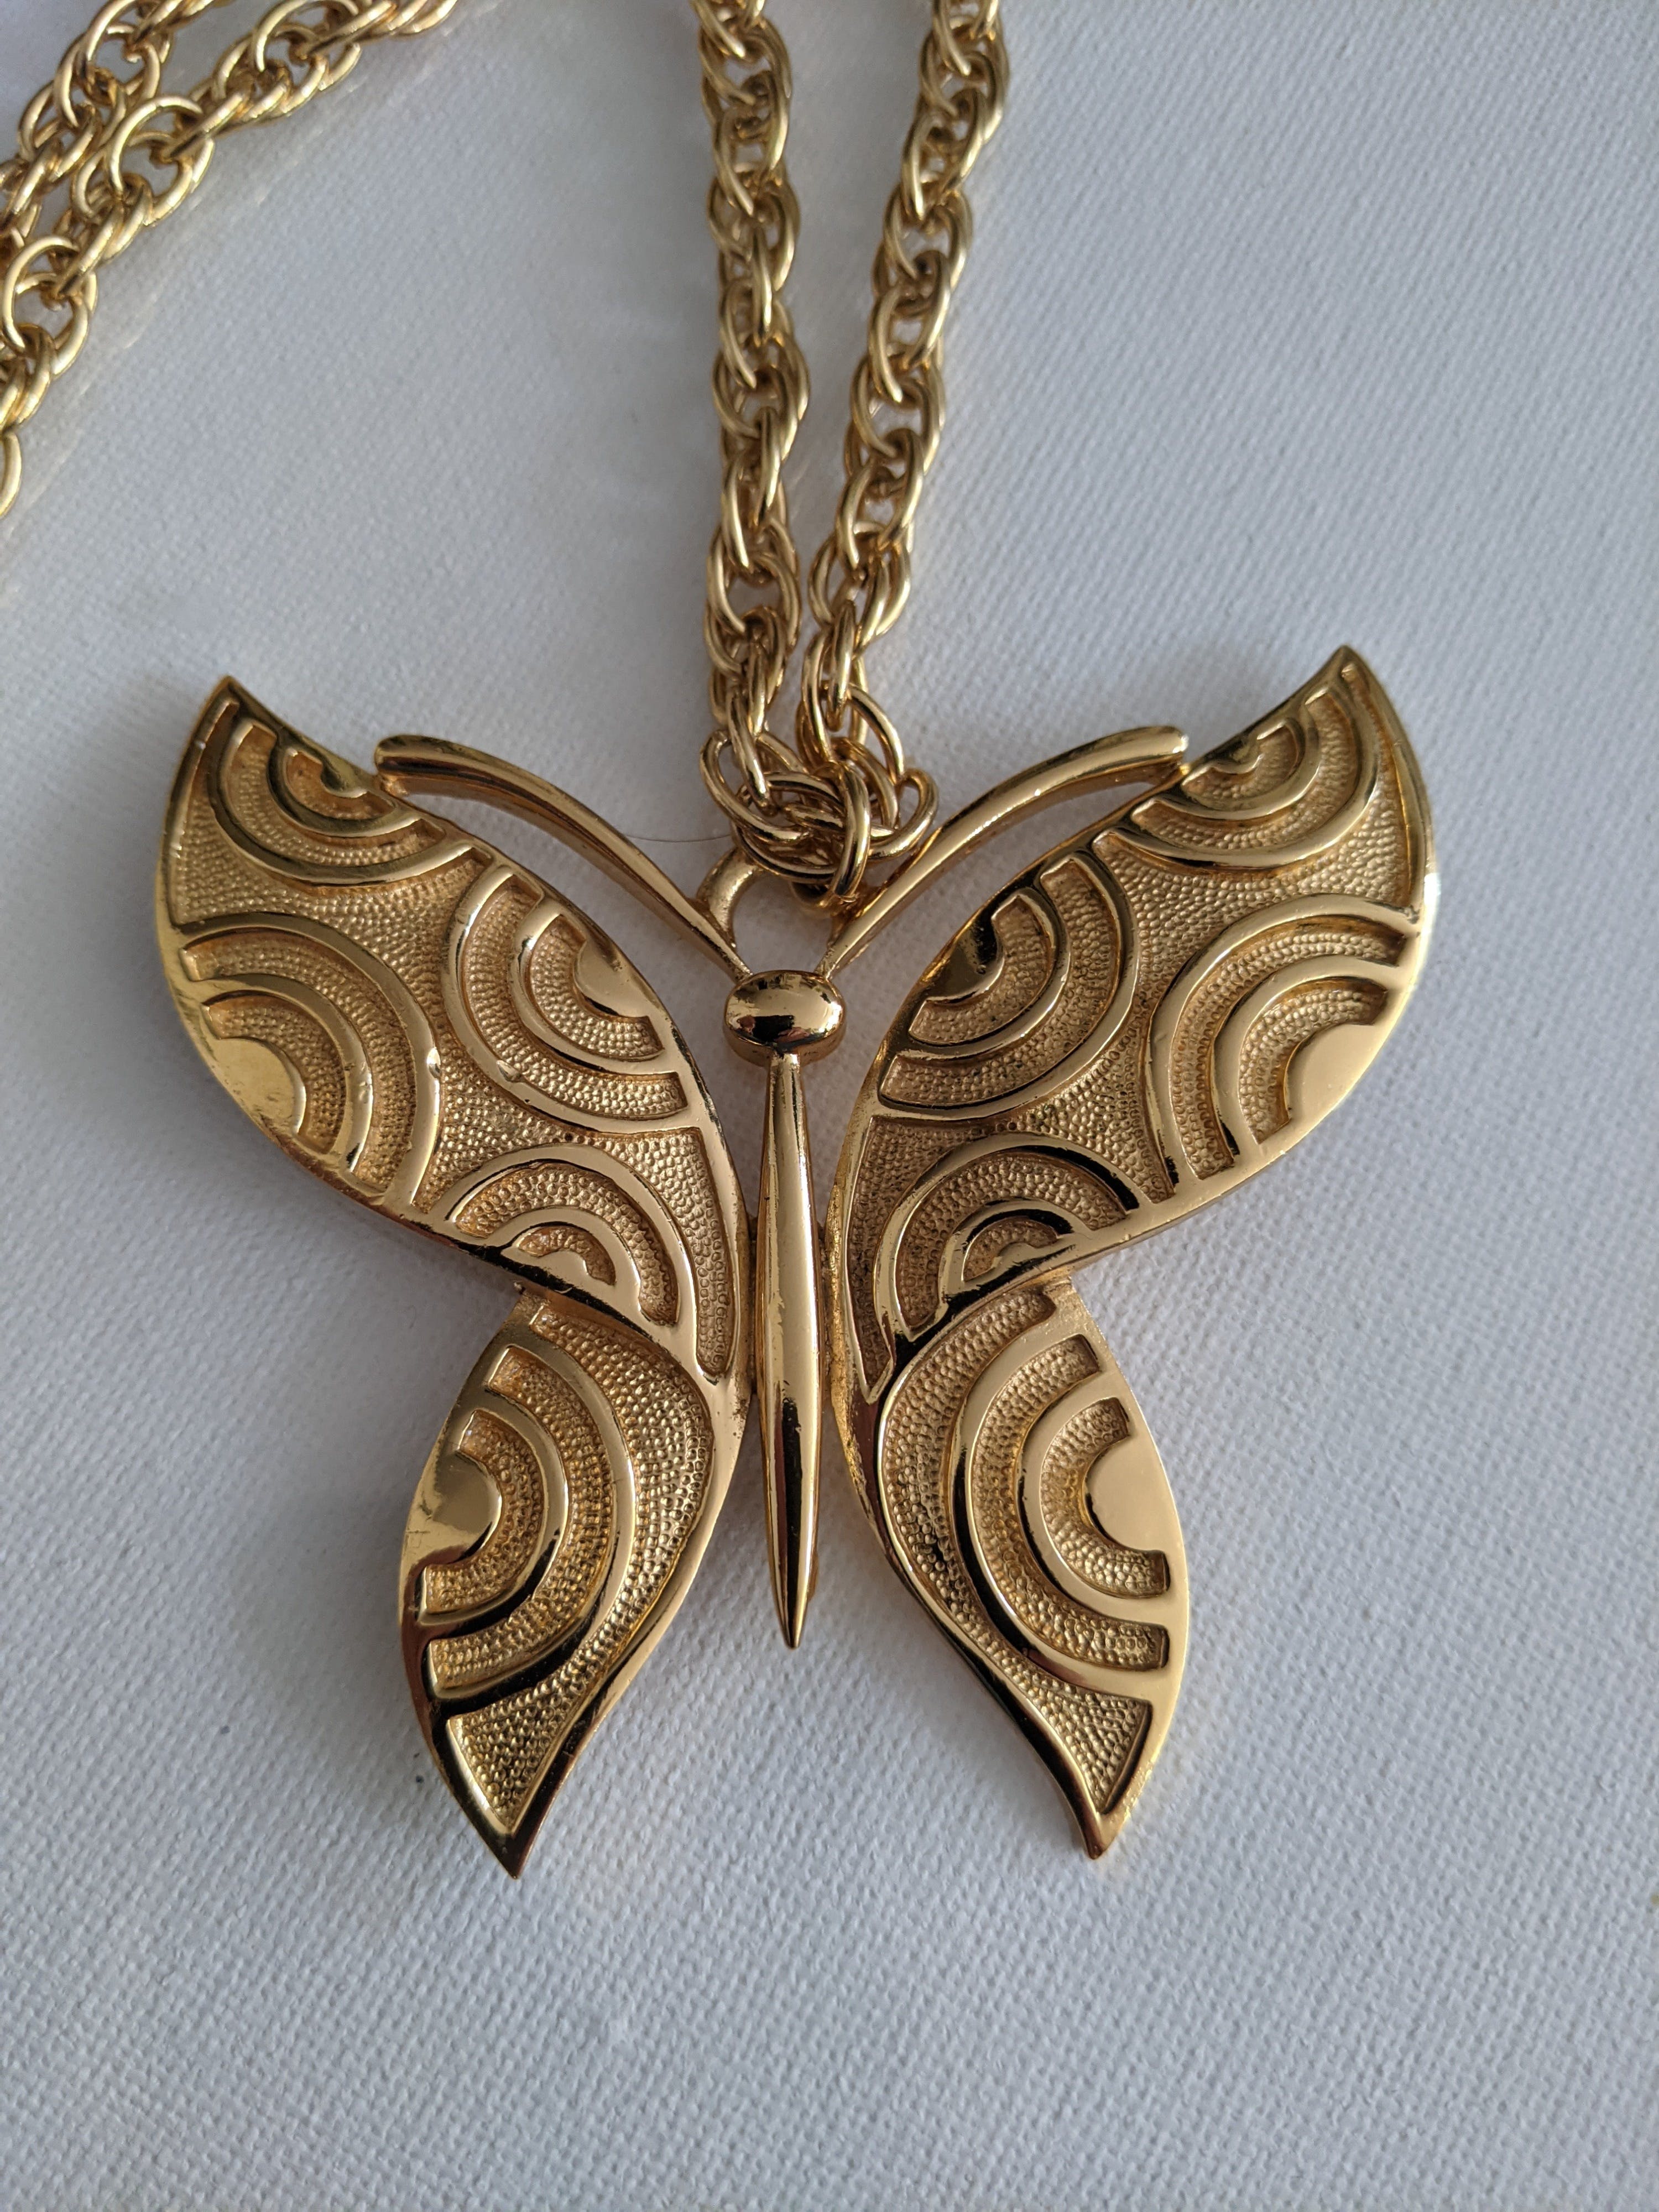 Vintage 60's Golden Butterfly Pendant Necklace by Trafari | Shop THRILLING